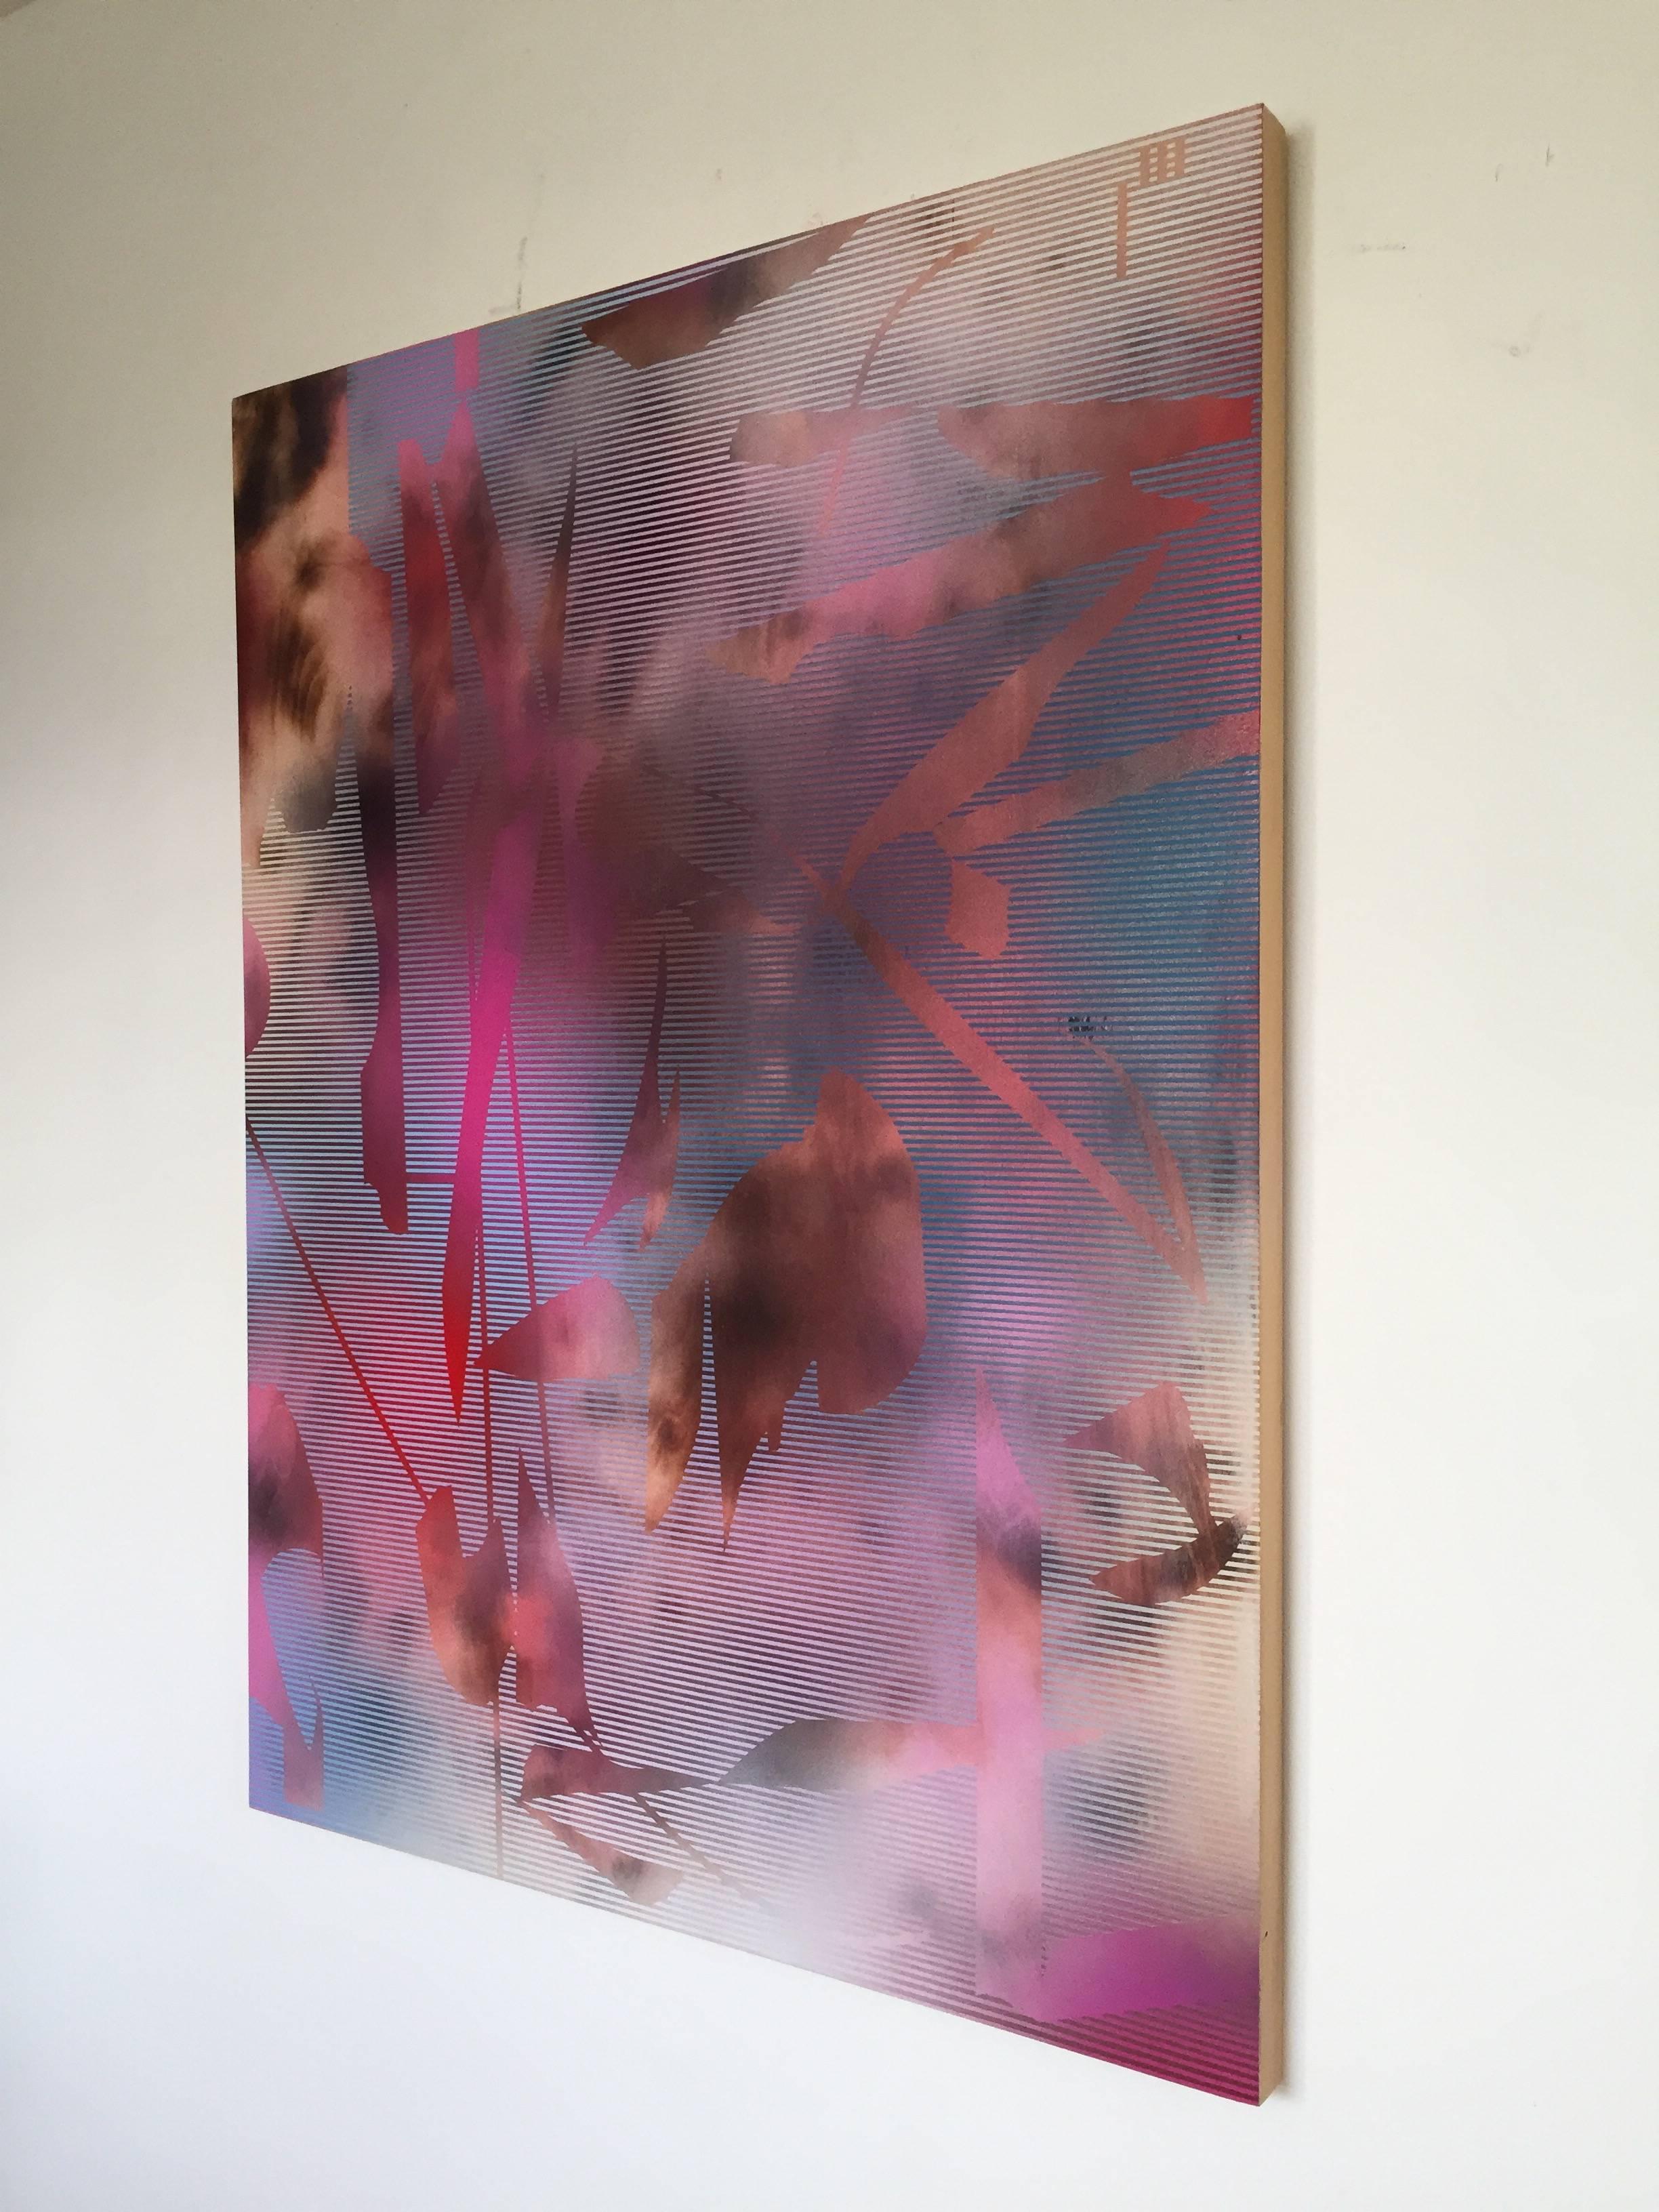 <p>Artist Comments<br />I have been engaging my work with notions of repetition, graffiti and blur derived from the pictorial works of artists Jack Whitten, Sterling Ruby and Gerhard Richter. A synthesis of these interests is materializing in this